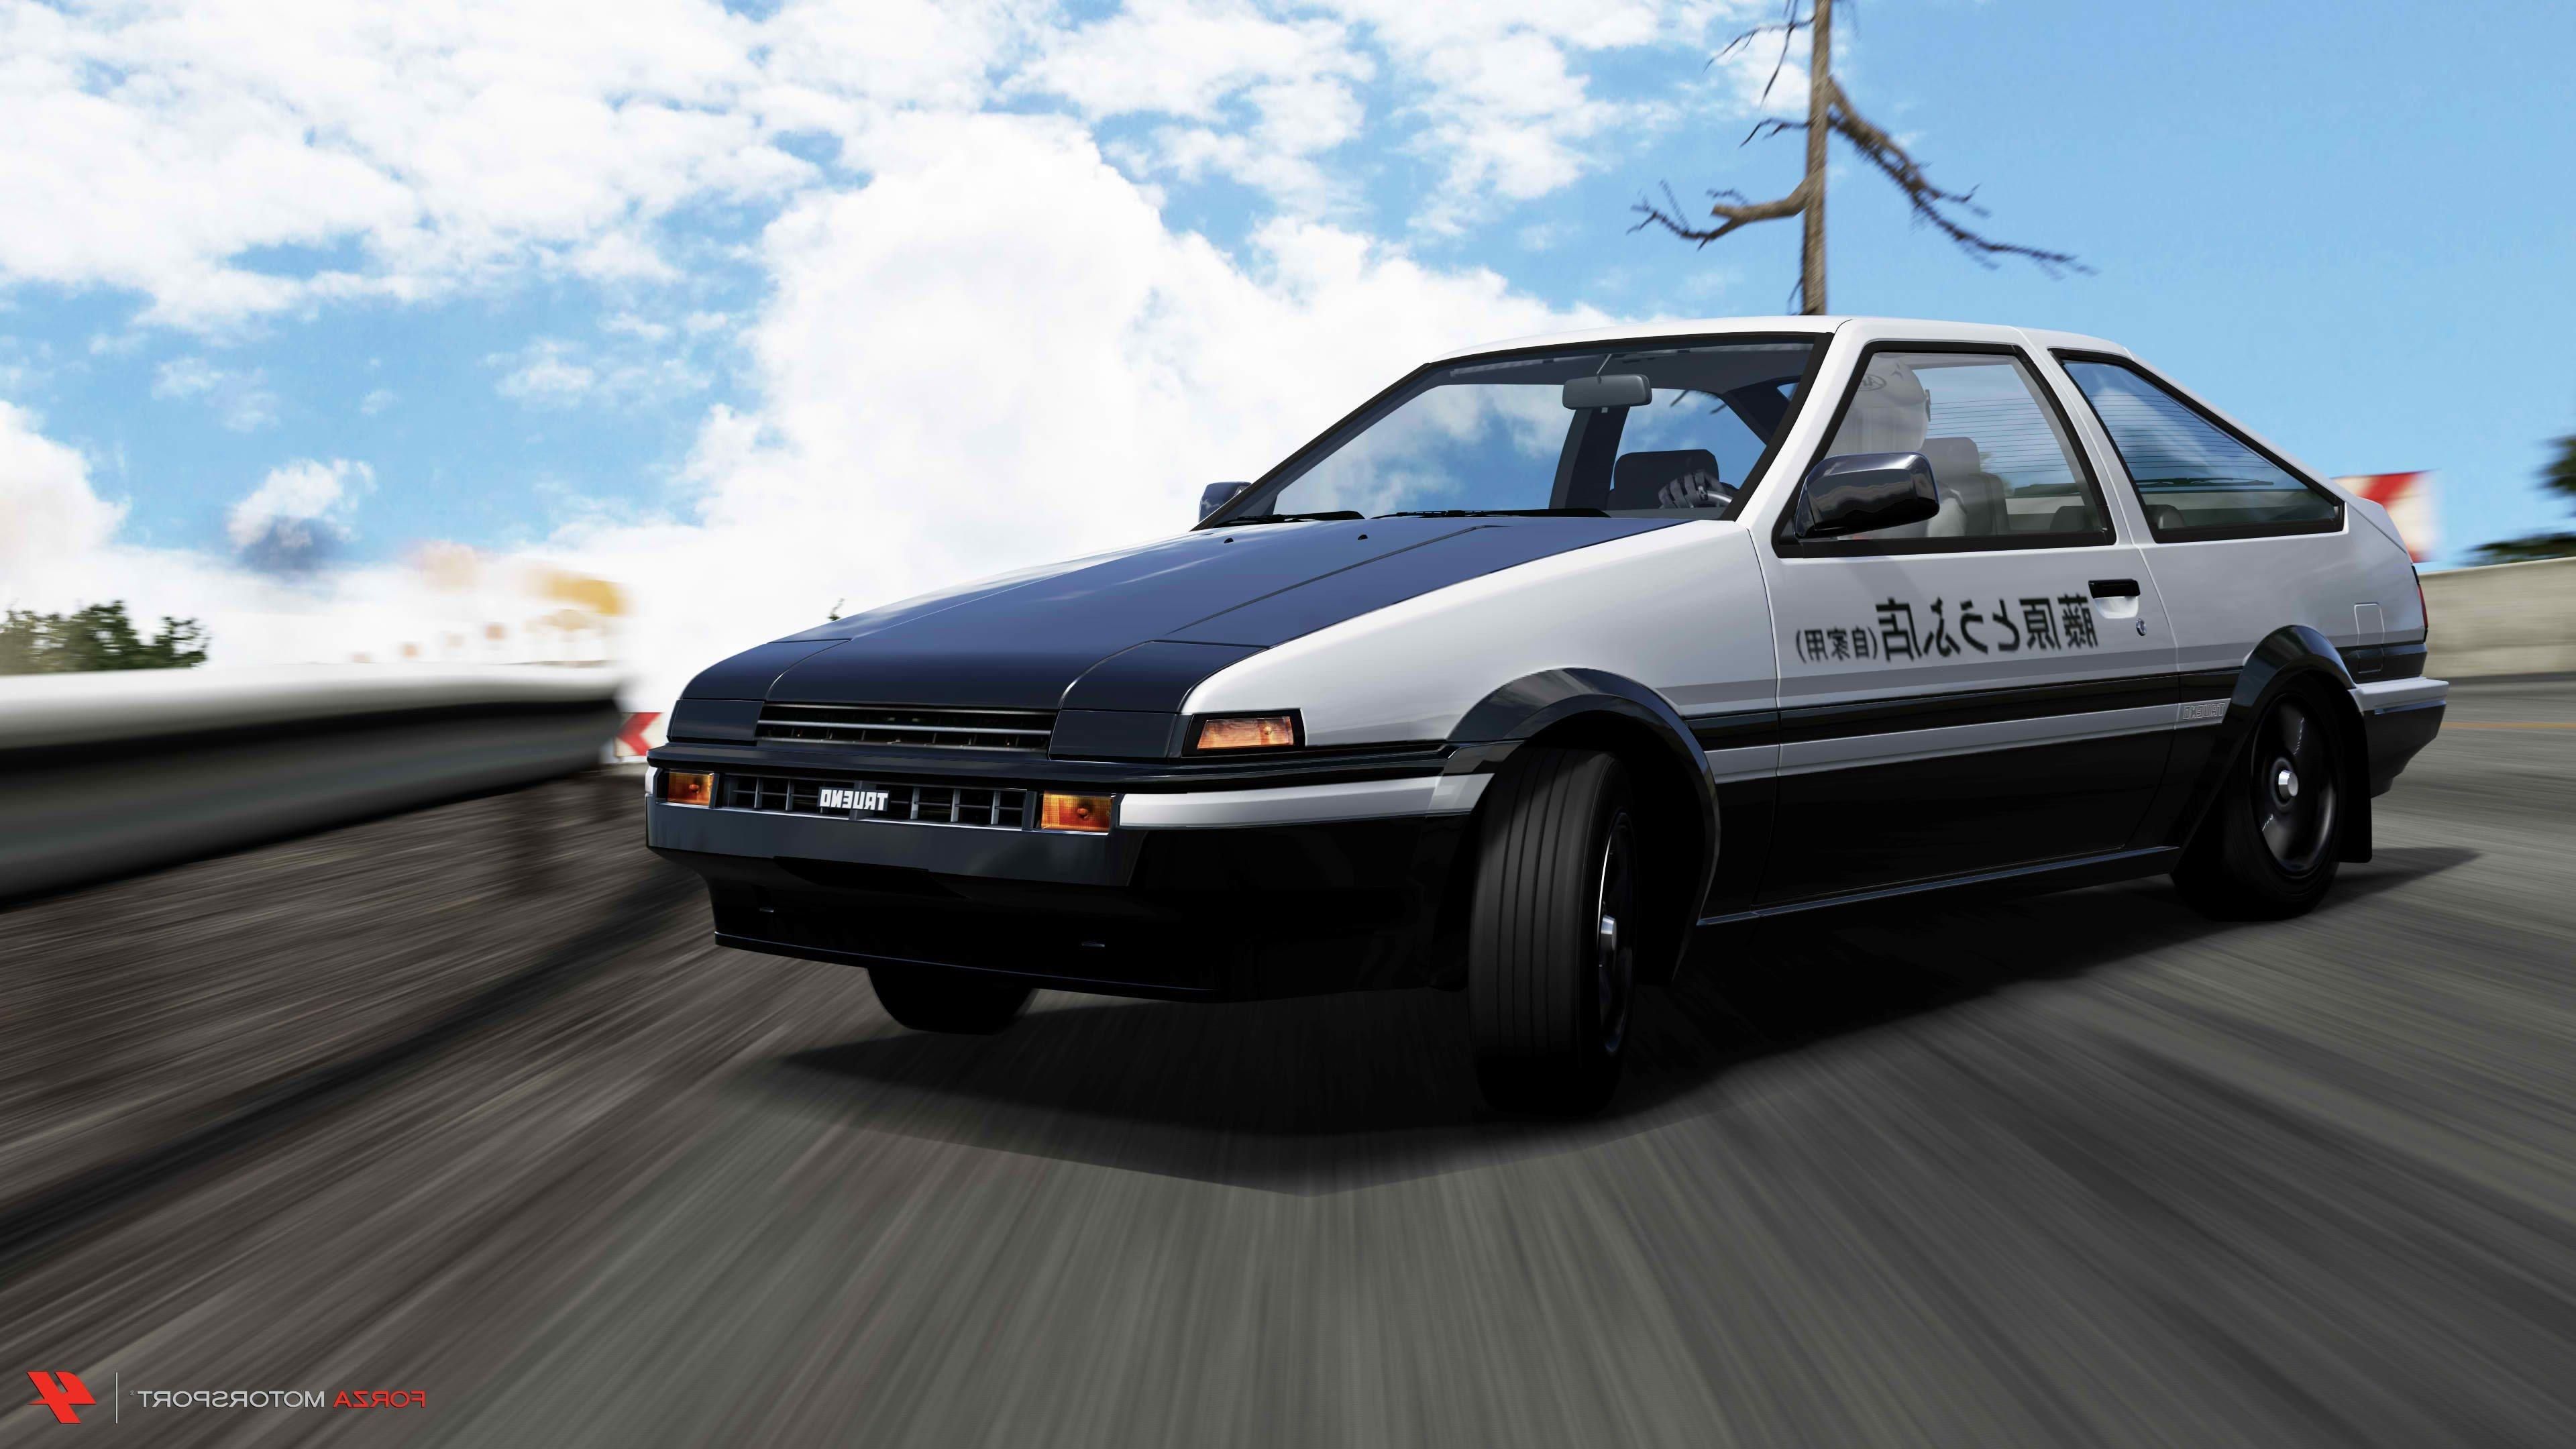 Hd Toyota Corolla Ae86 Wallpaper Image Of Toyota Corolla Corolla Levin And Toyota Sprinter Trueno Wallpaper & Background Download